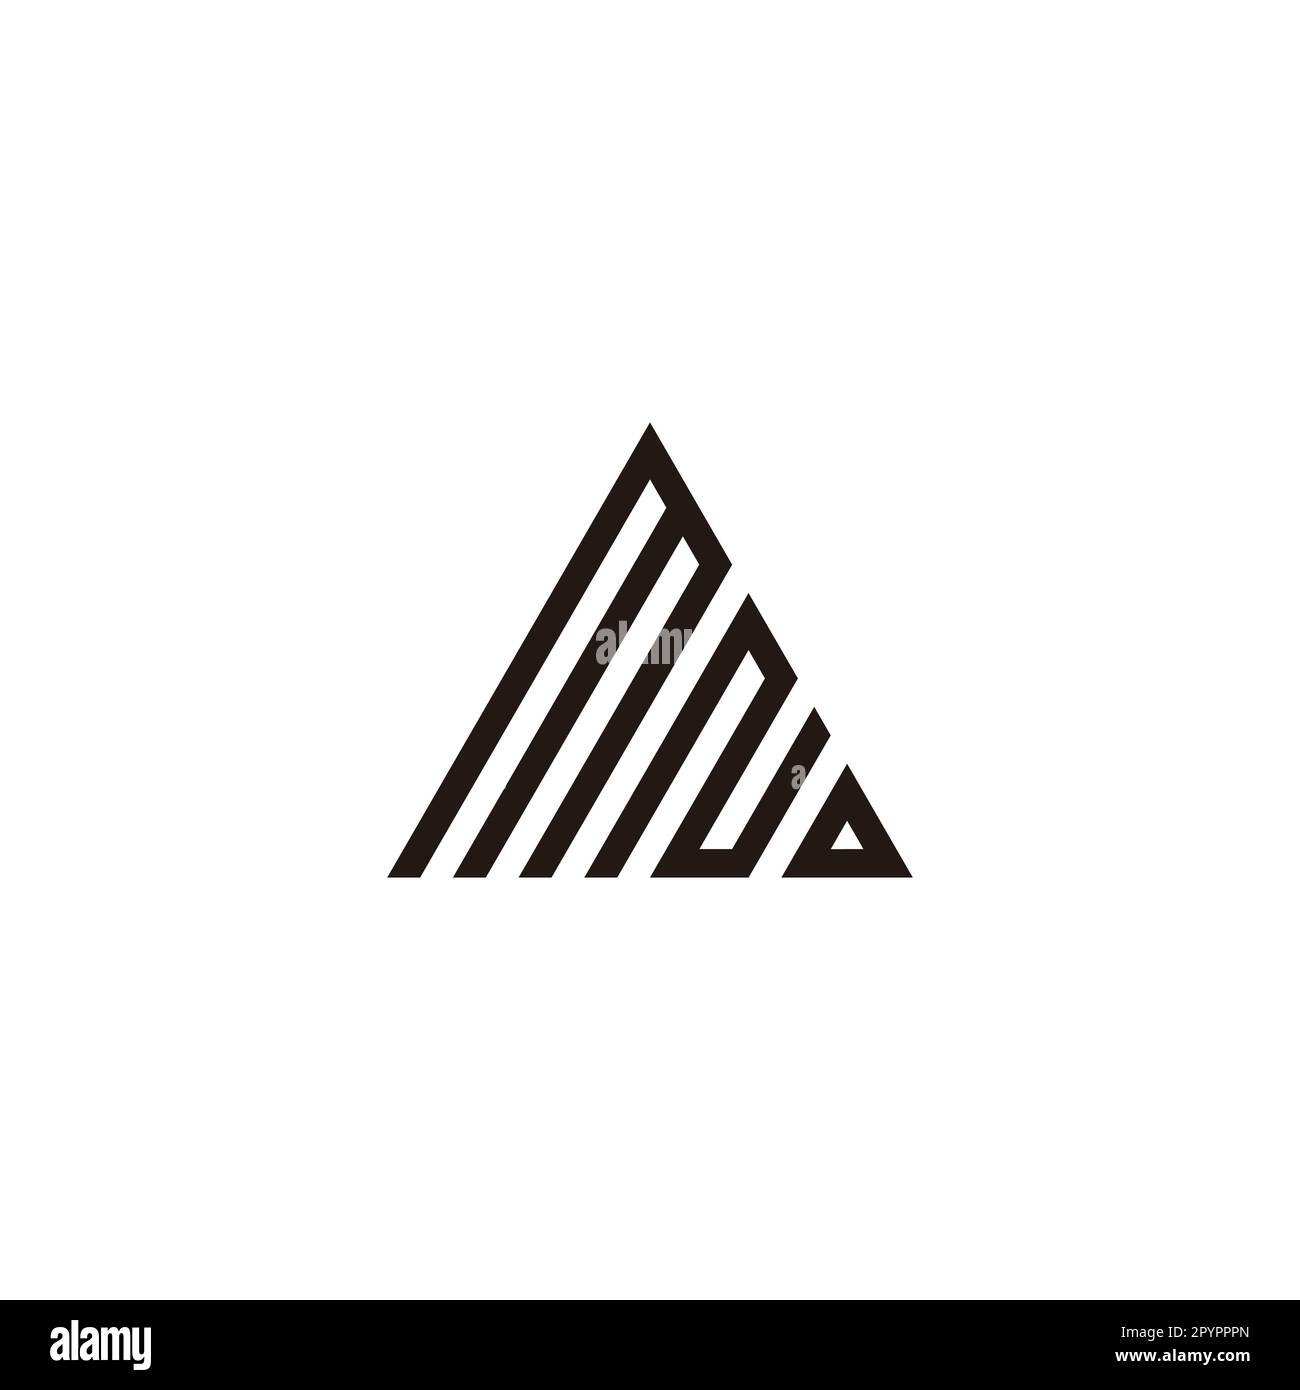 Letter m, N and D triangle, building geometric symbol simple logo ...